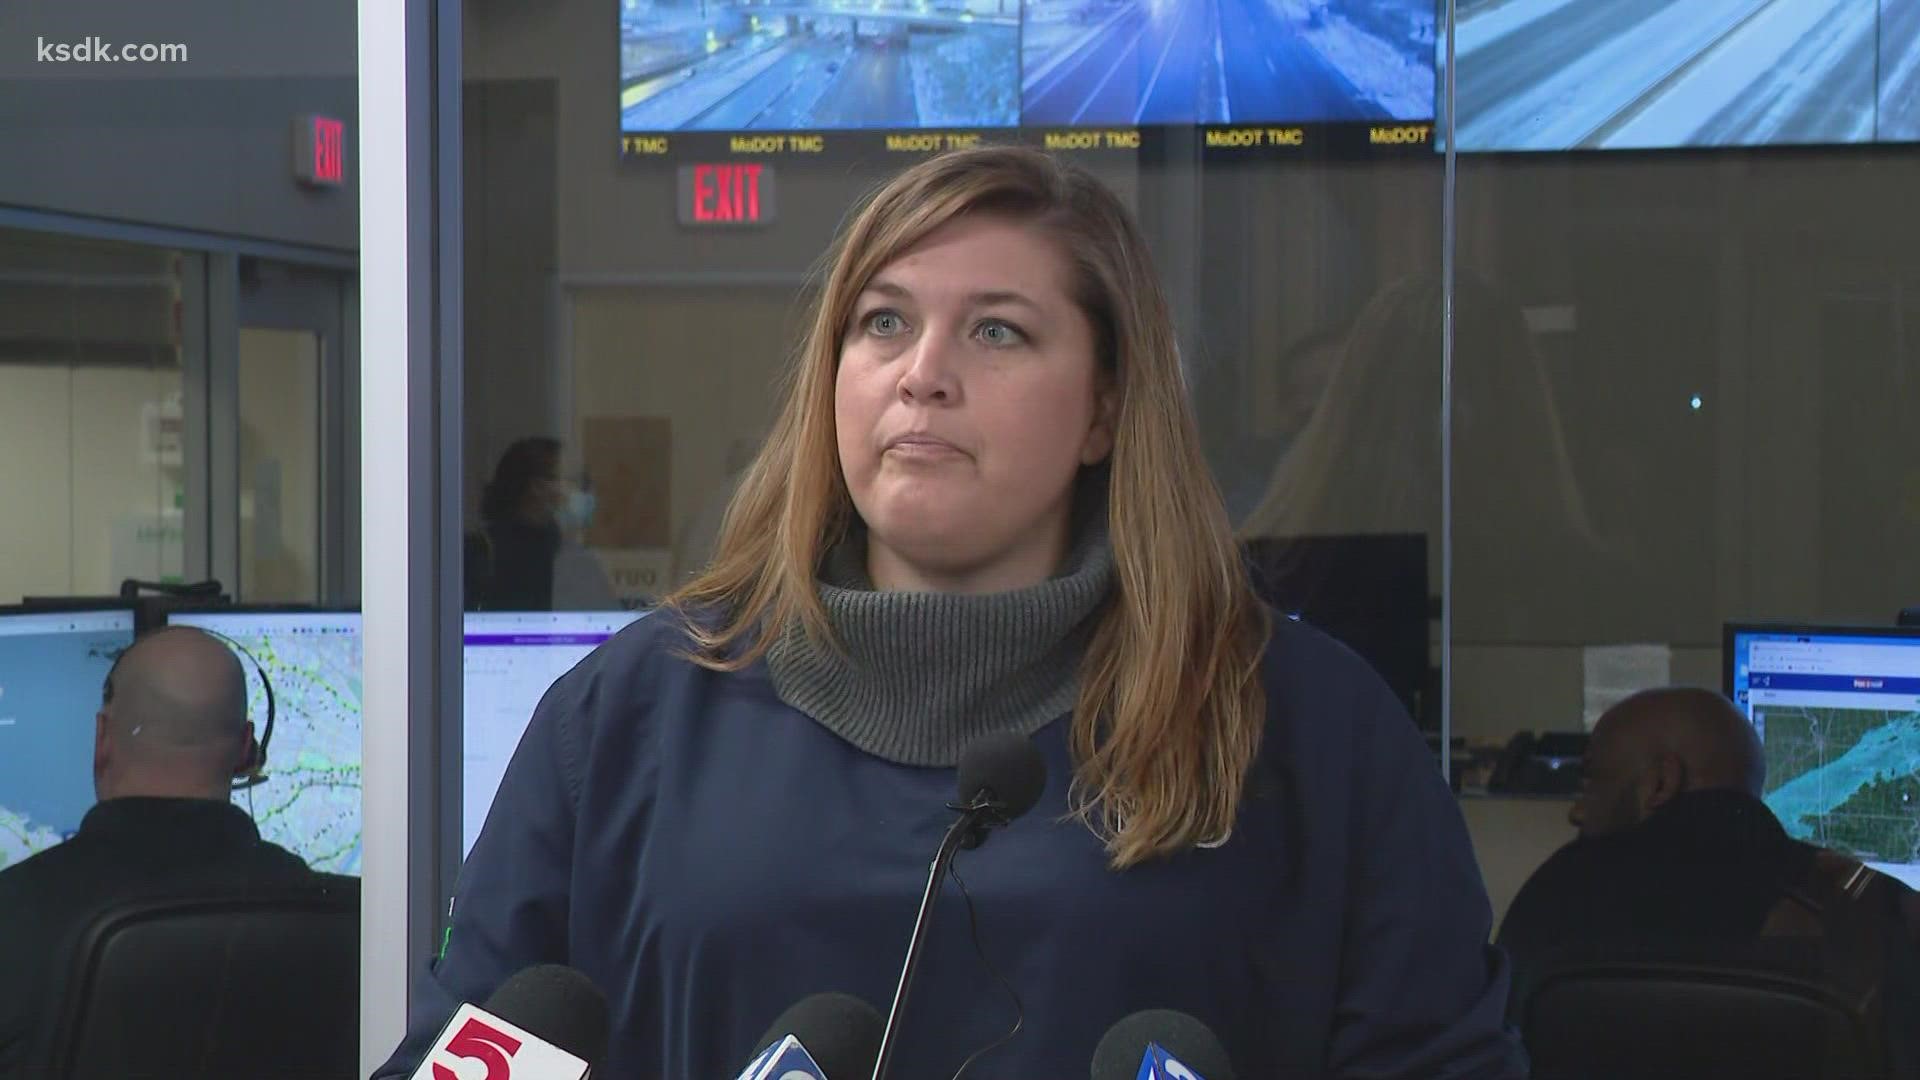 Officials with the Missouri Department of Transportation are giving an update on treatment and road conditions ahead of the morning rush.